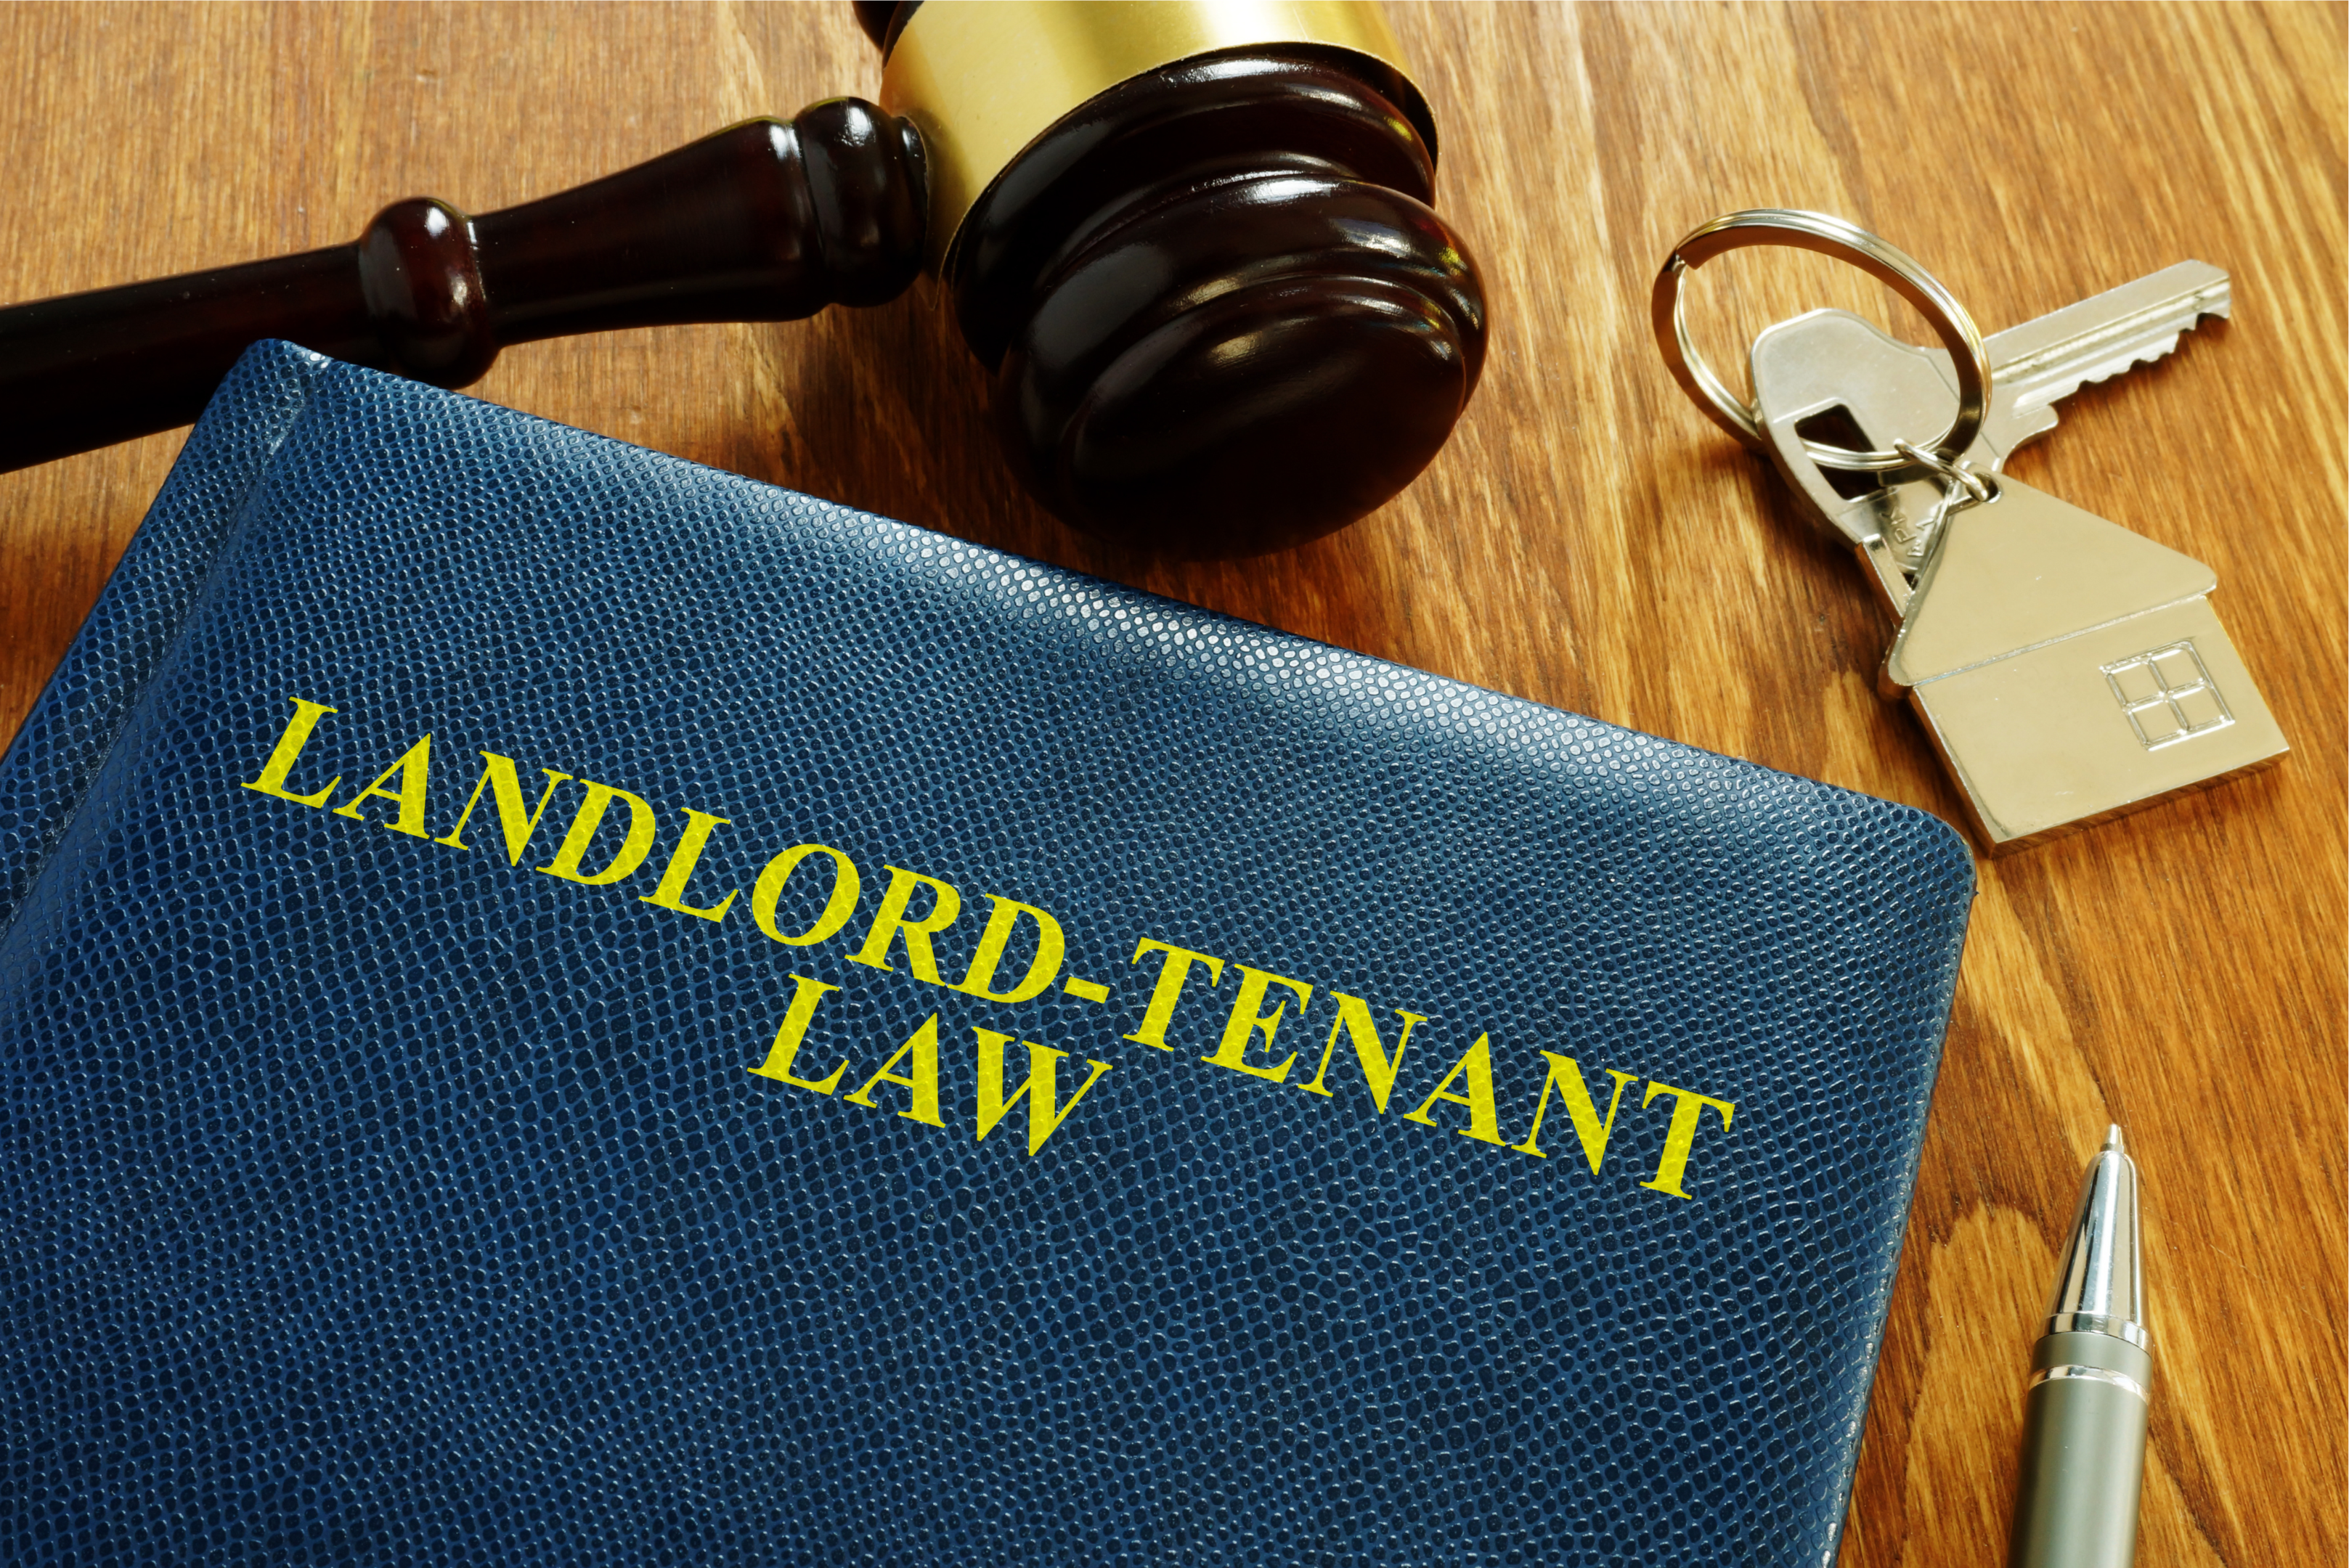 Landlord-Tenant Law Property Management Company